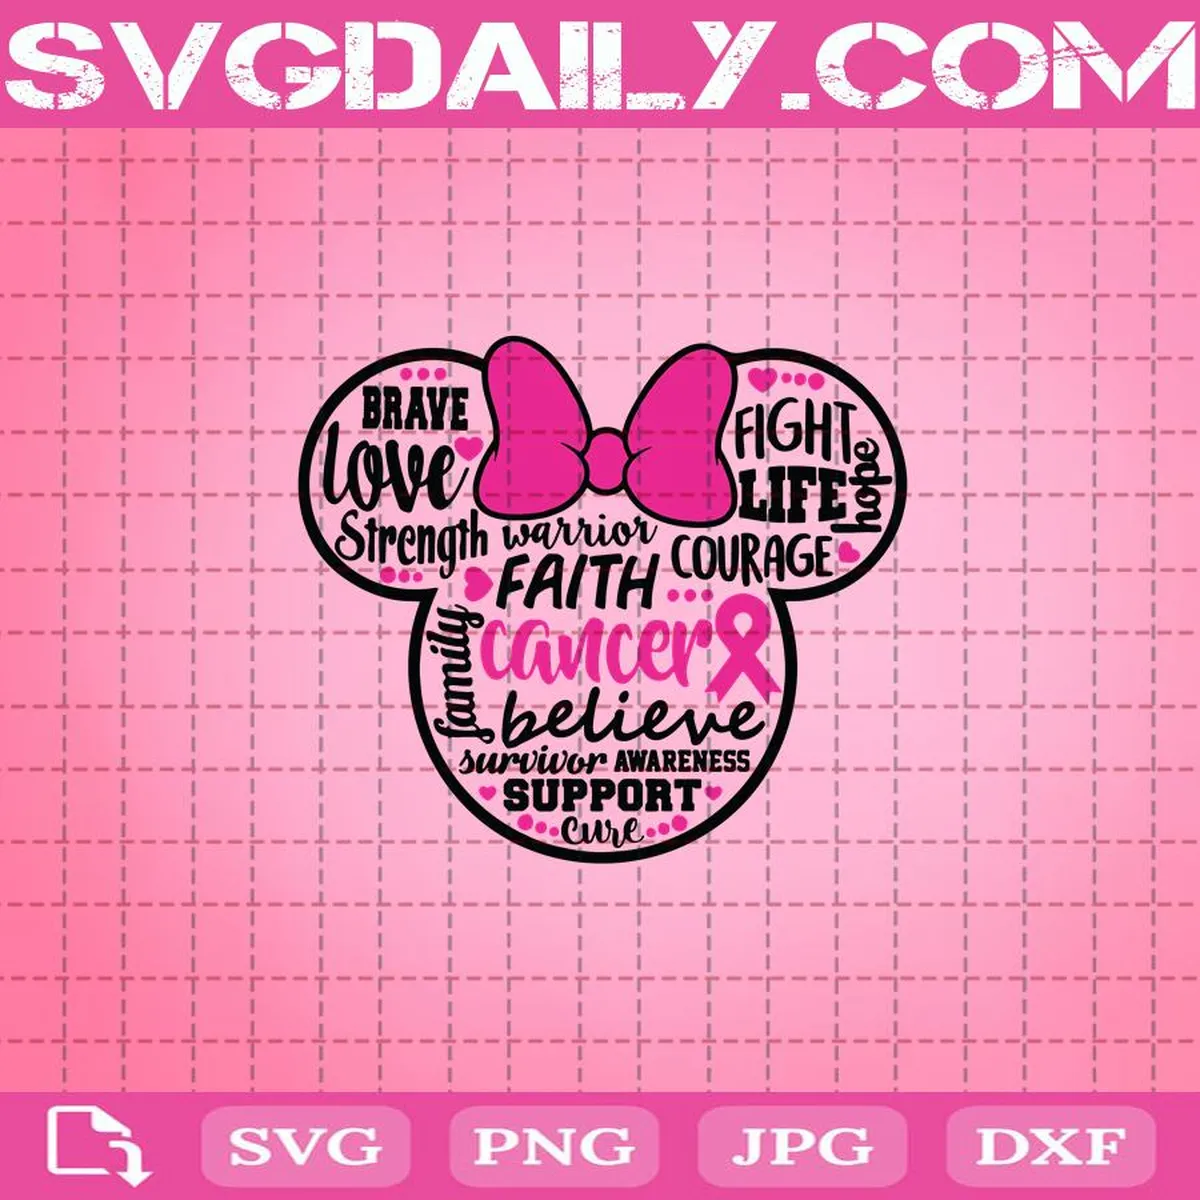 Mickey Head Breast Cancer Svg, Breast Cancer Svg, Breast Cancer Ribbon Svg, Breast Cancer Awareness Svg, Cancer Awareness Svg